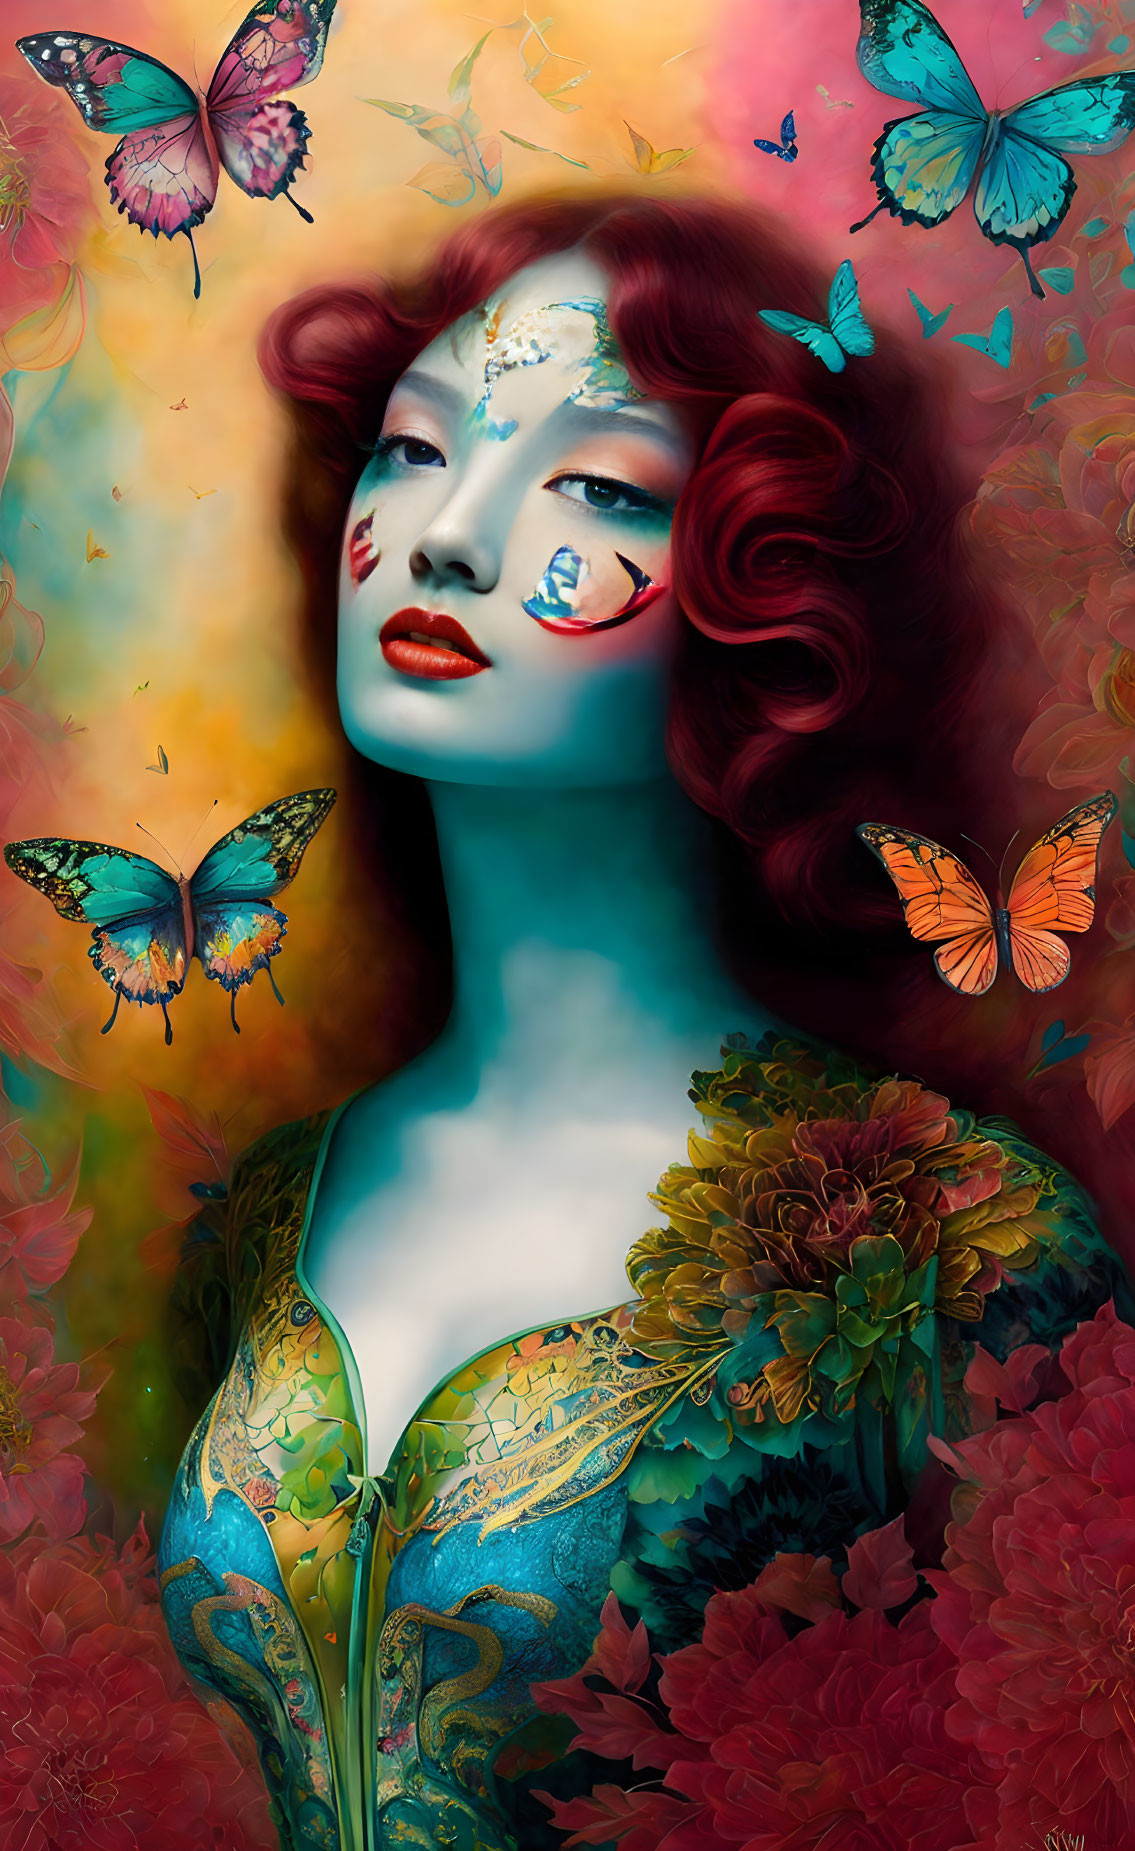 Vibrant portrait of woman with red hair, blue skin, butterfly motifs, and colorful flowers